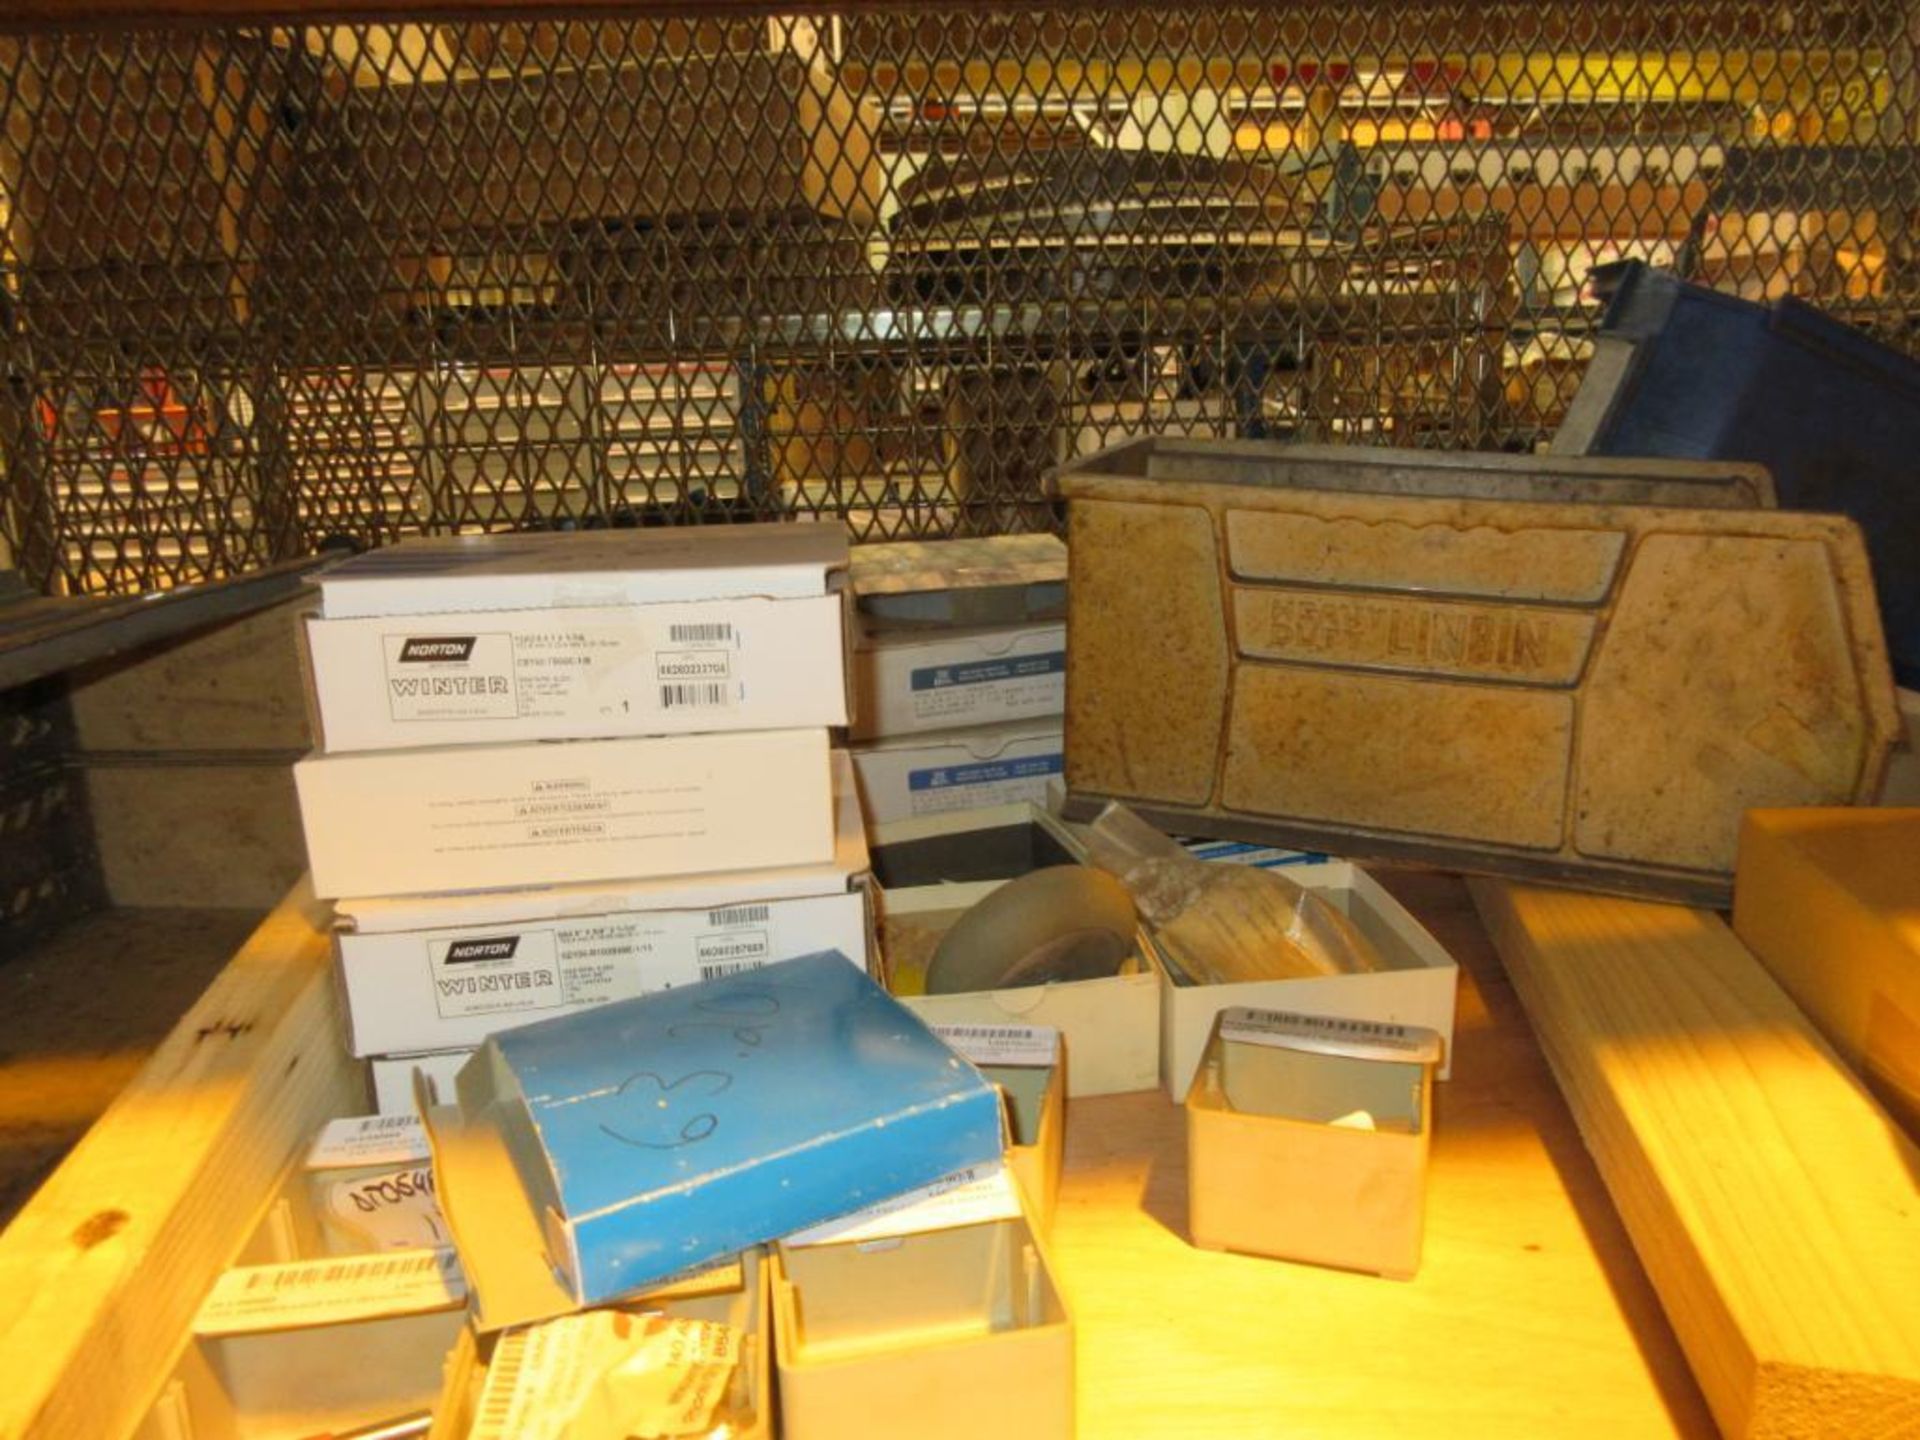 CONTENTS OF (22) SECTIONS PALLET RACK: ASSORTED ABRASIVES, SUNNEN STONES, TOOL BITS, DOVETAIL CUTTER - Image 38 of 43